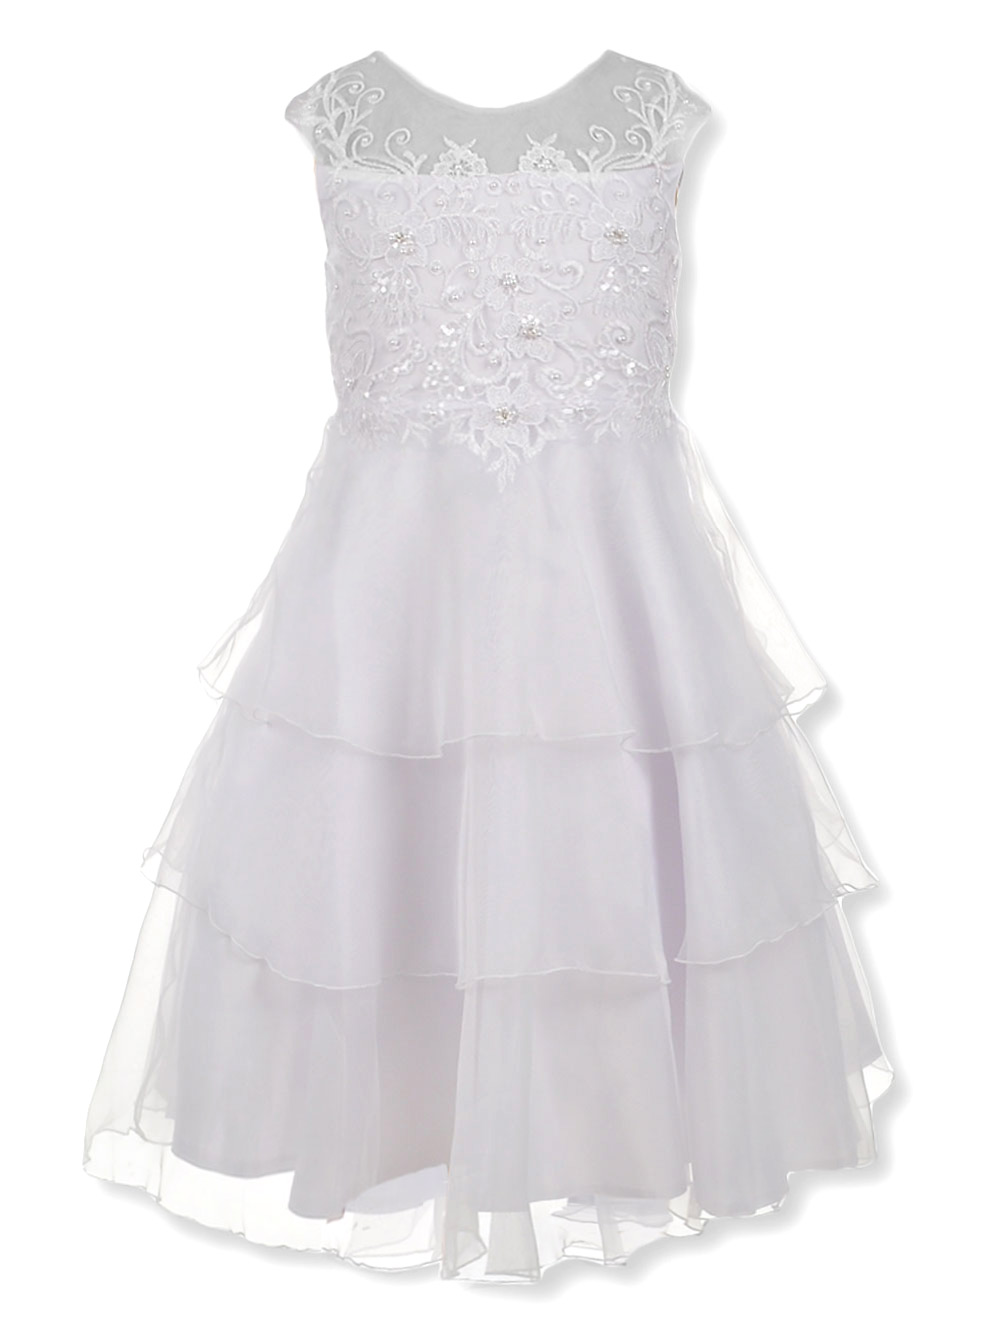 Girls White Special Occasion Dresses